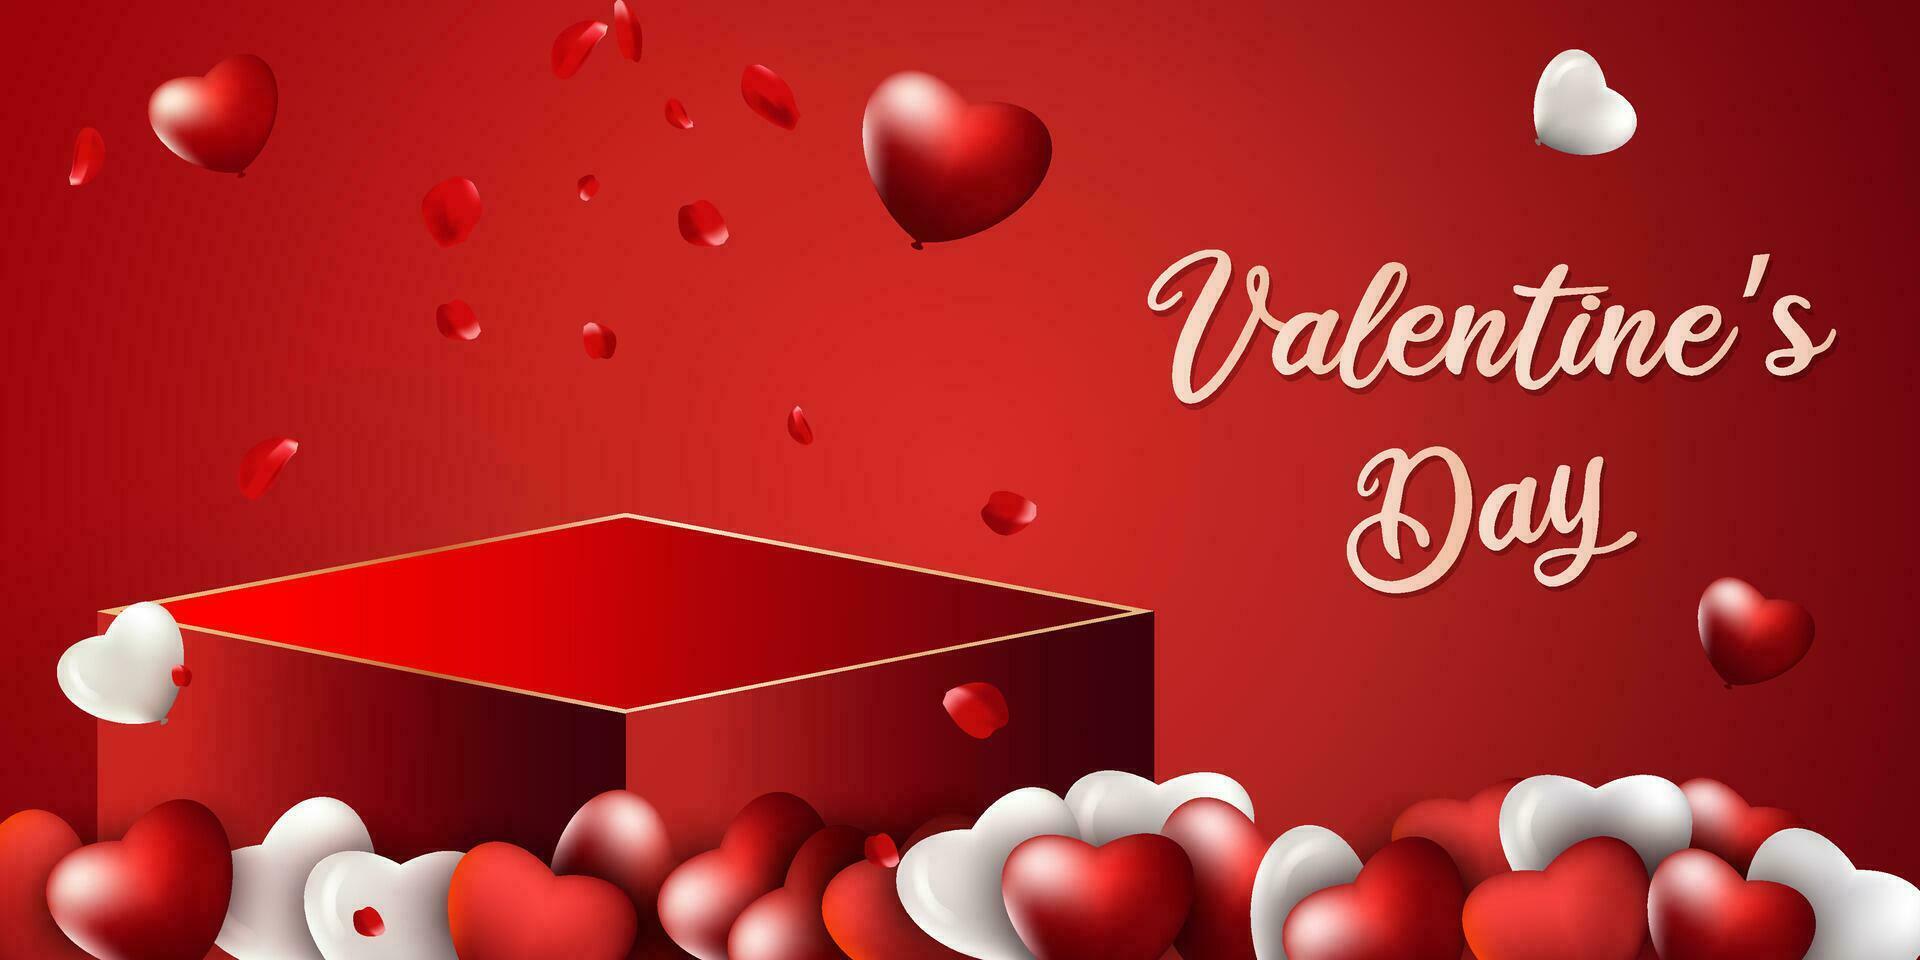 The product podium is in the shape of a box, with a Valentine's Day love theme vector